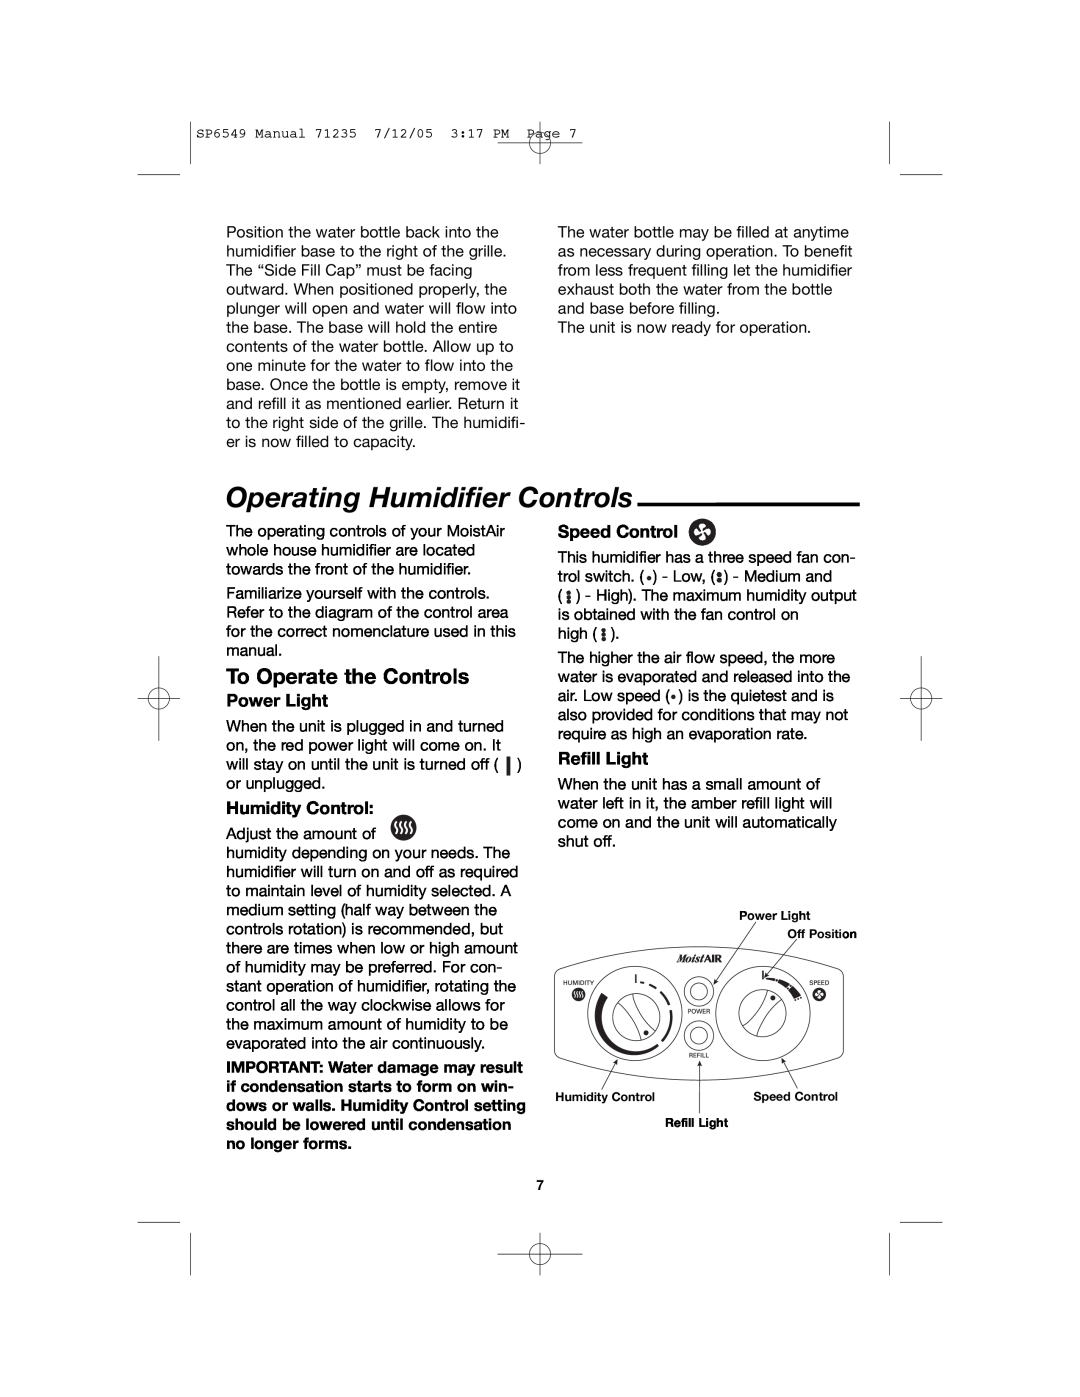 MoistAir MA 0950 owner manual Operating Humidifier Controls, To Operate the Controls 